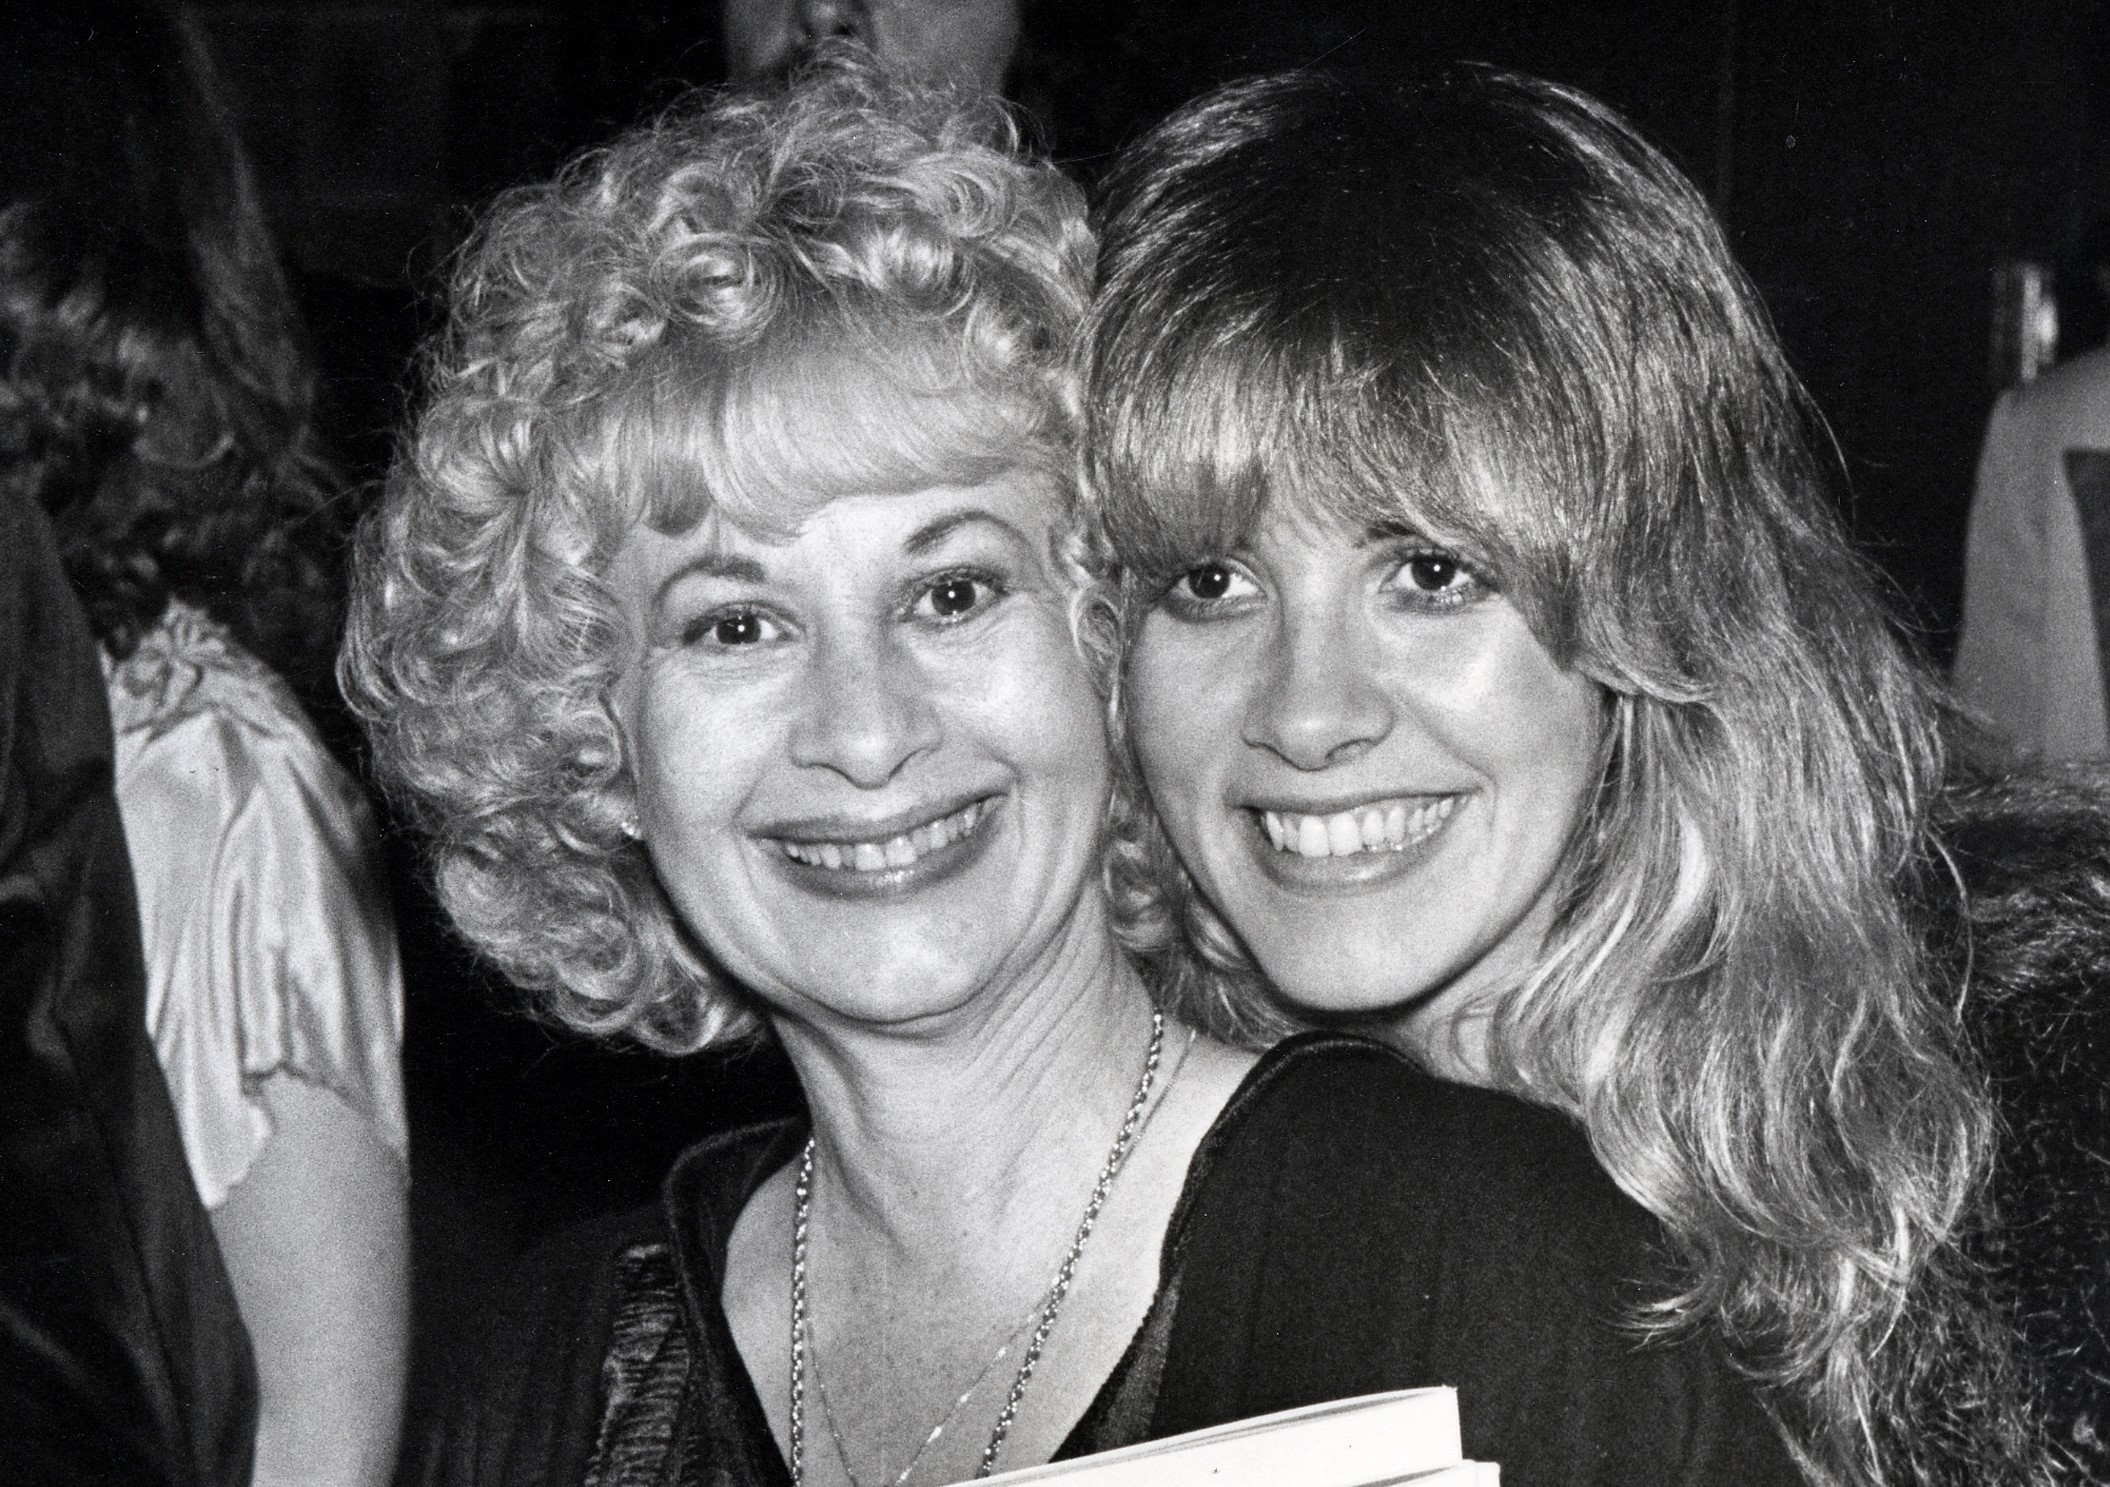 A black and white photo of Stevie Nicks and her mother Barbara Nicks. They both wear black and pose cheek to cheek.